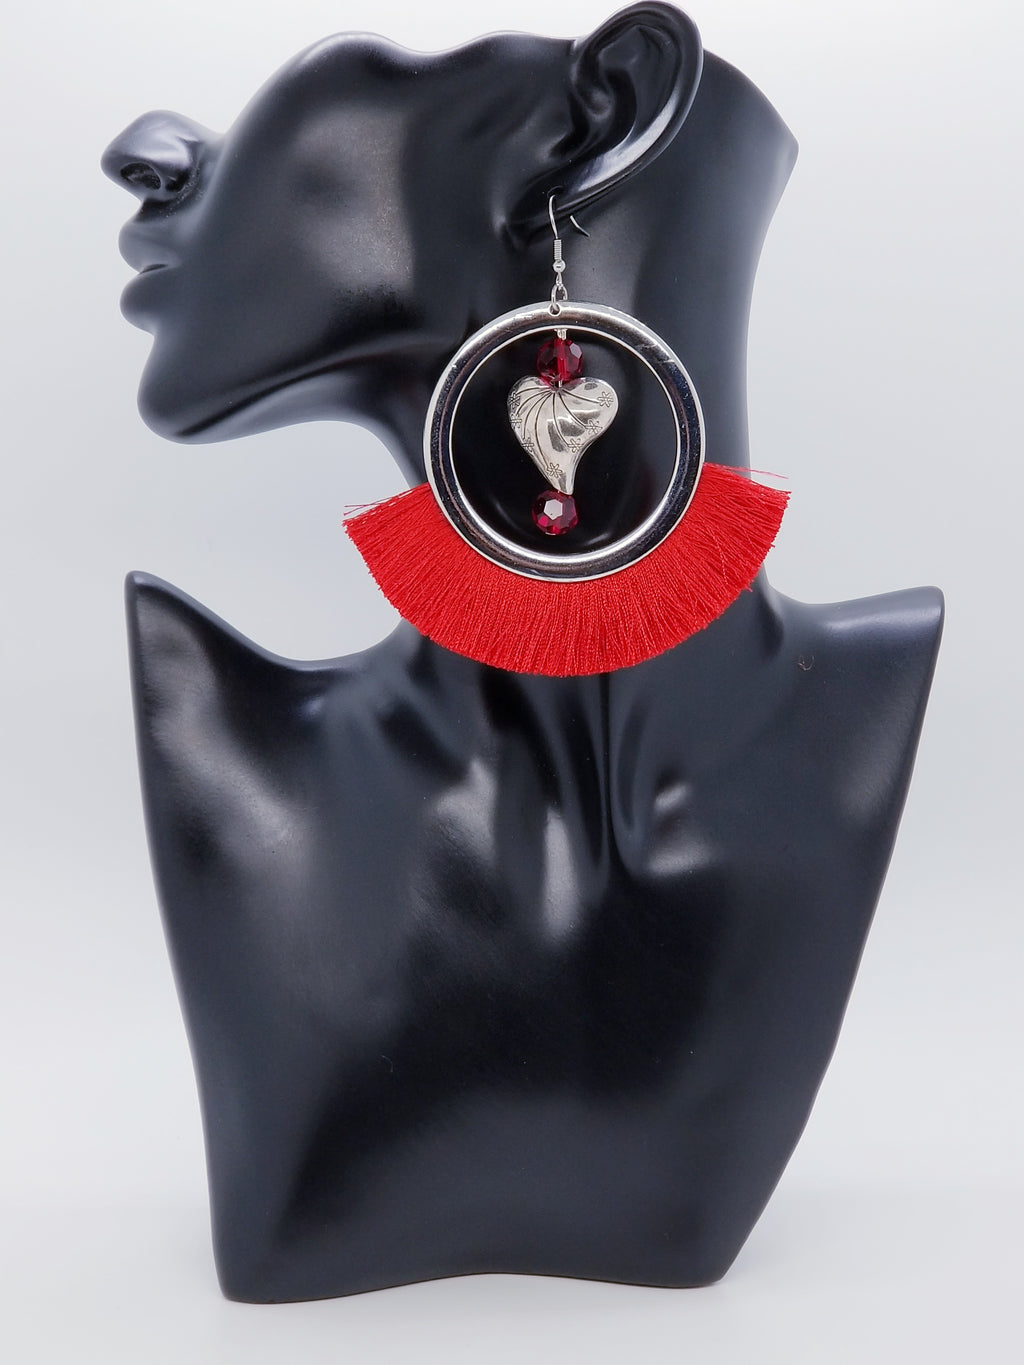 Length: 4 inches | Weight: 1.8 ounces  Designed just for you! The earrings are handmade using   red fringe silver circle charms, silver ornate heart, 10mm red faceted glass beads, silver head pins, and hypoallergenic hooks with back closures. 